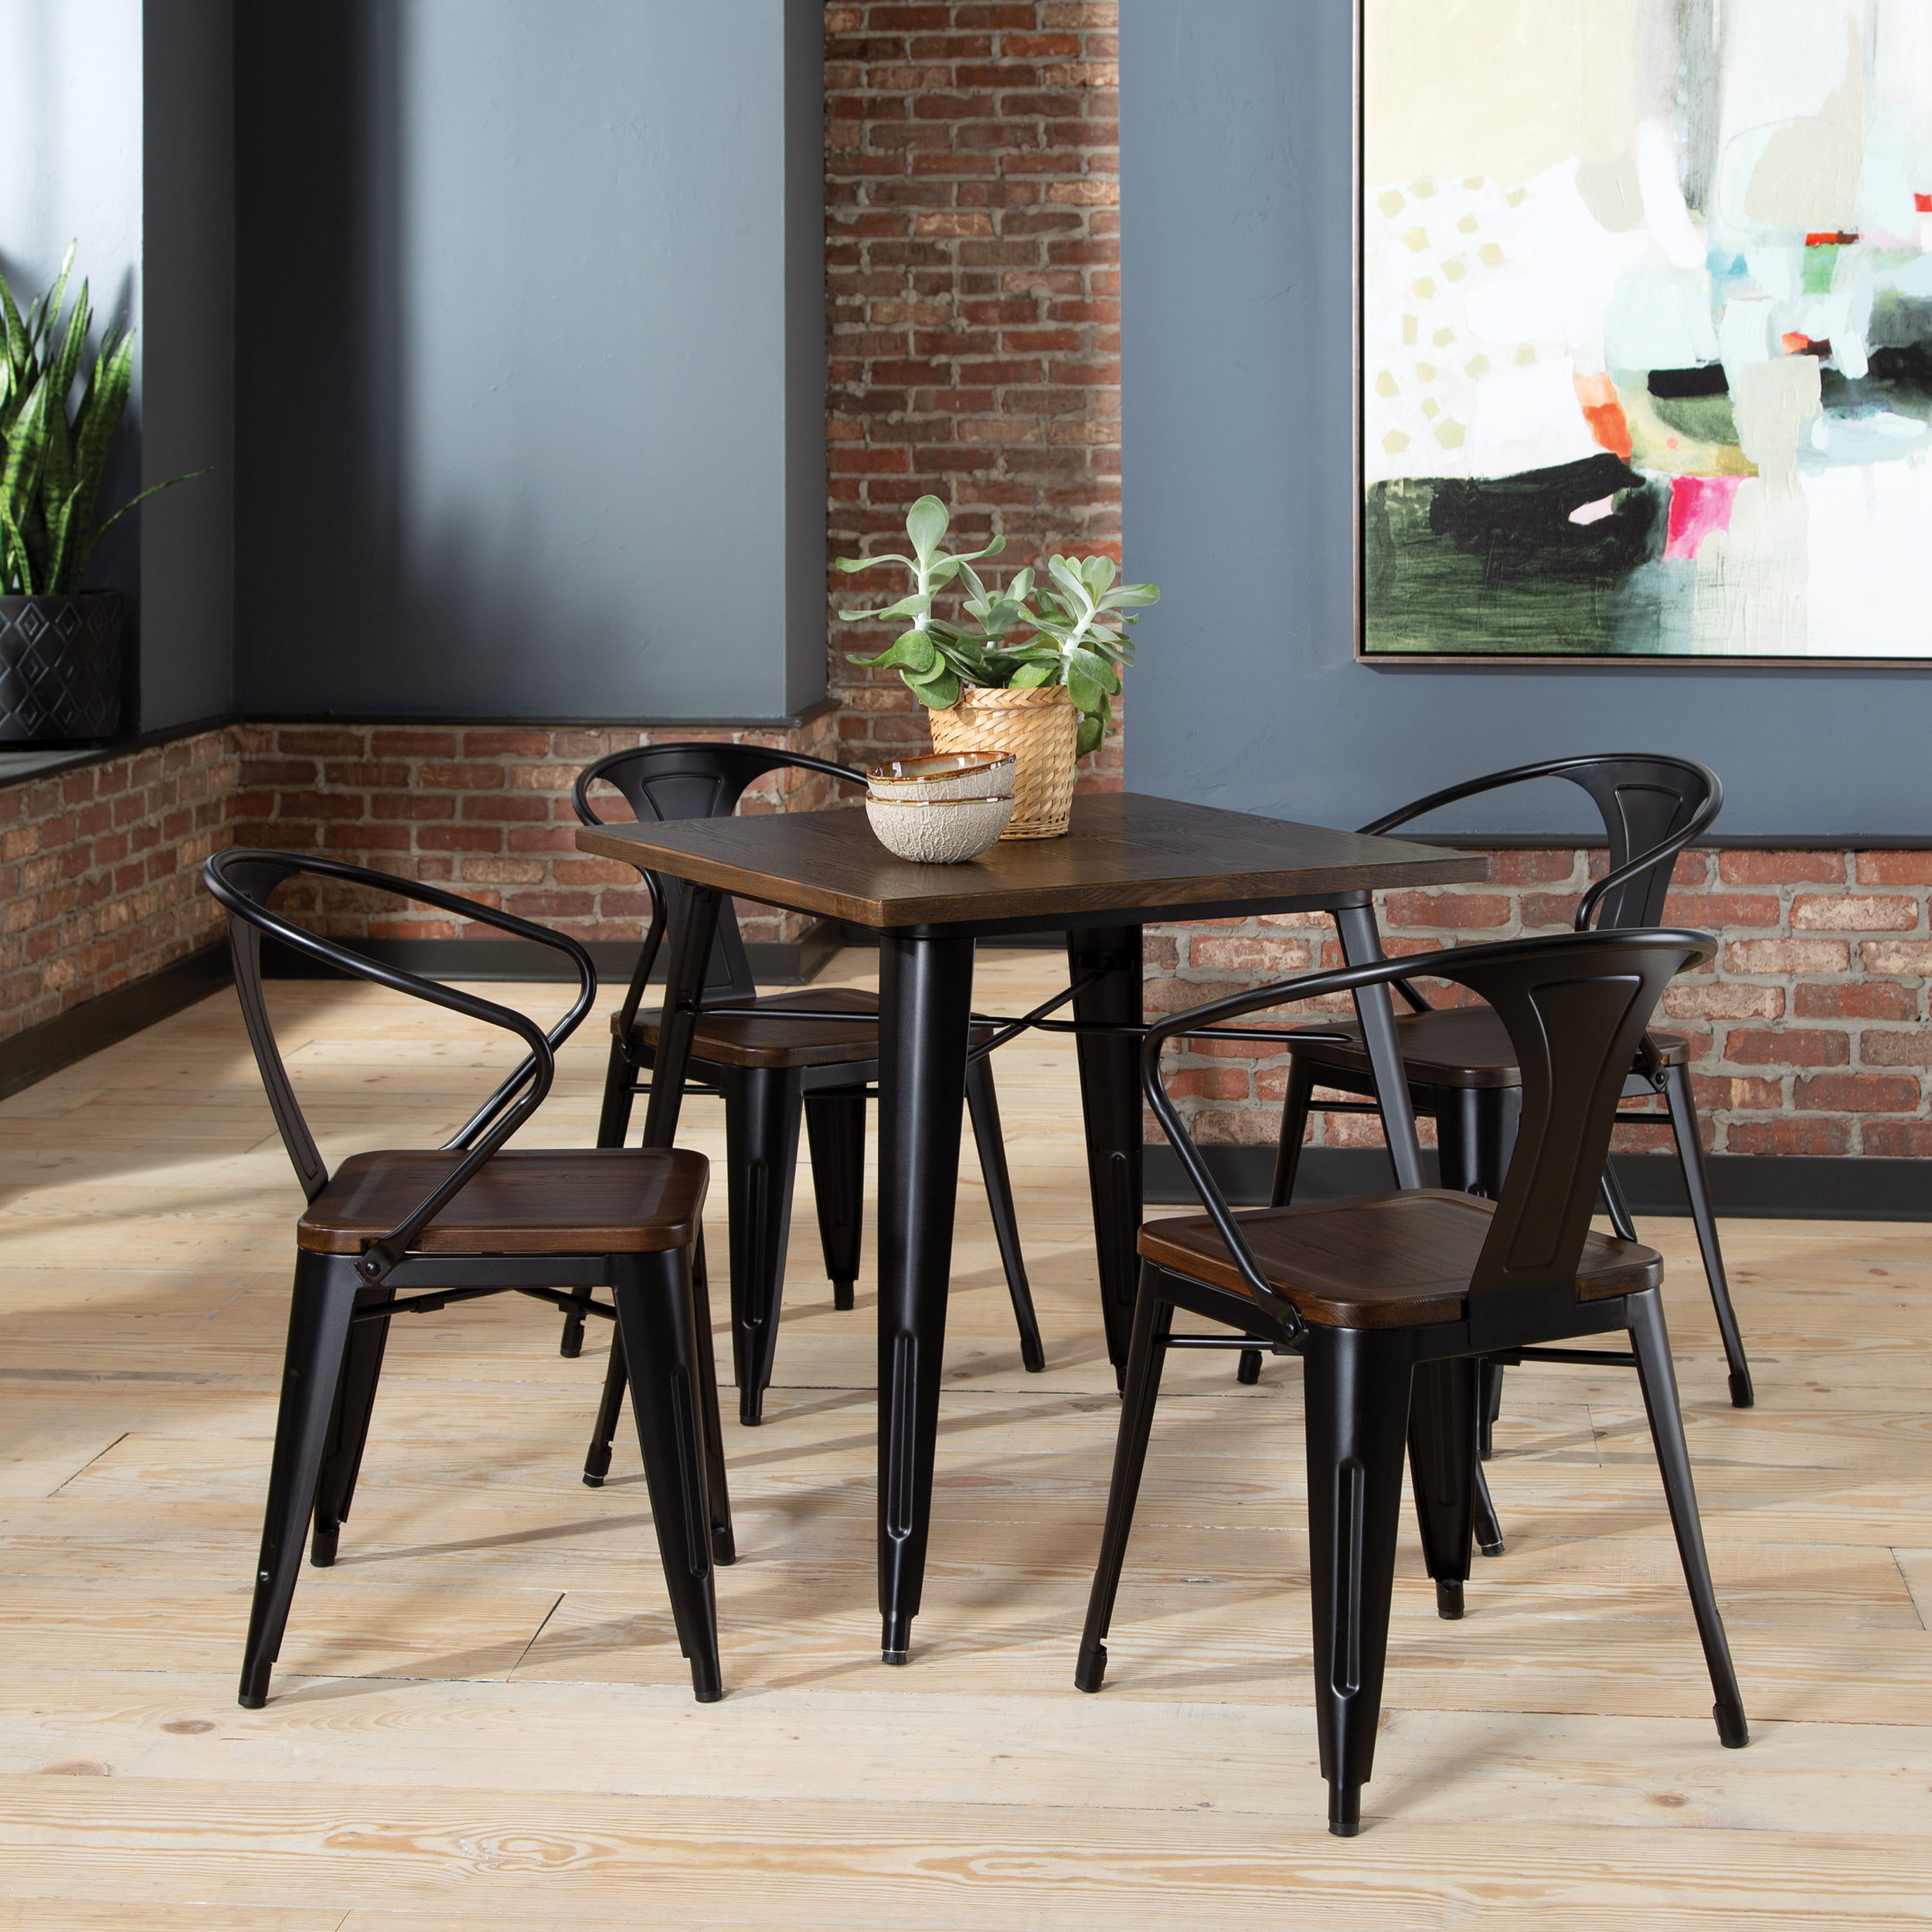 Ofm Industrial Modern 4 Assembled, Already Assembled Dining Room Chairs